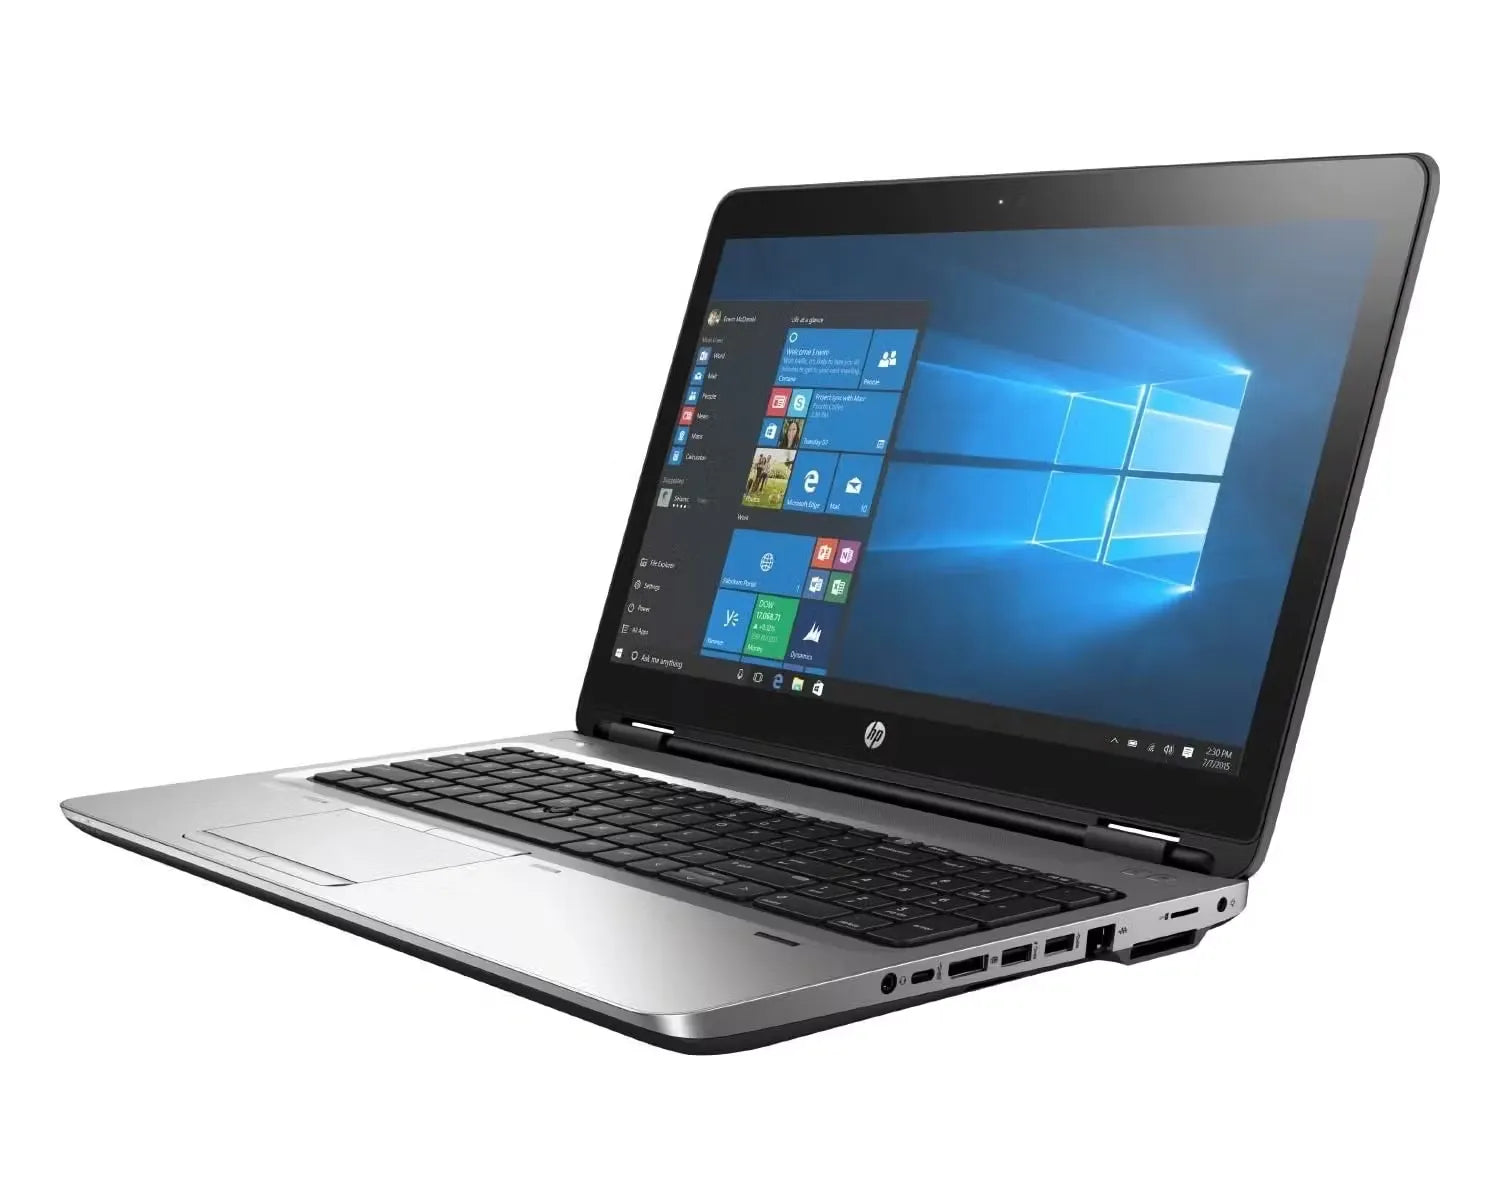 A silver HP ProBook 650 G3 laptop with a black keyboard and a 15.6 inch display. The laptop is closed and rests on a white surface.